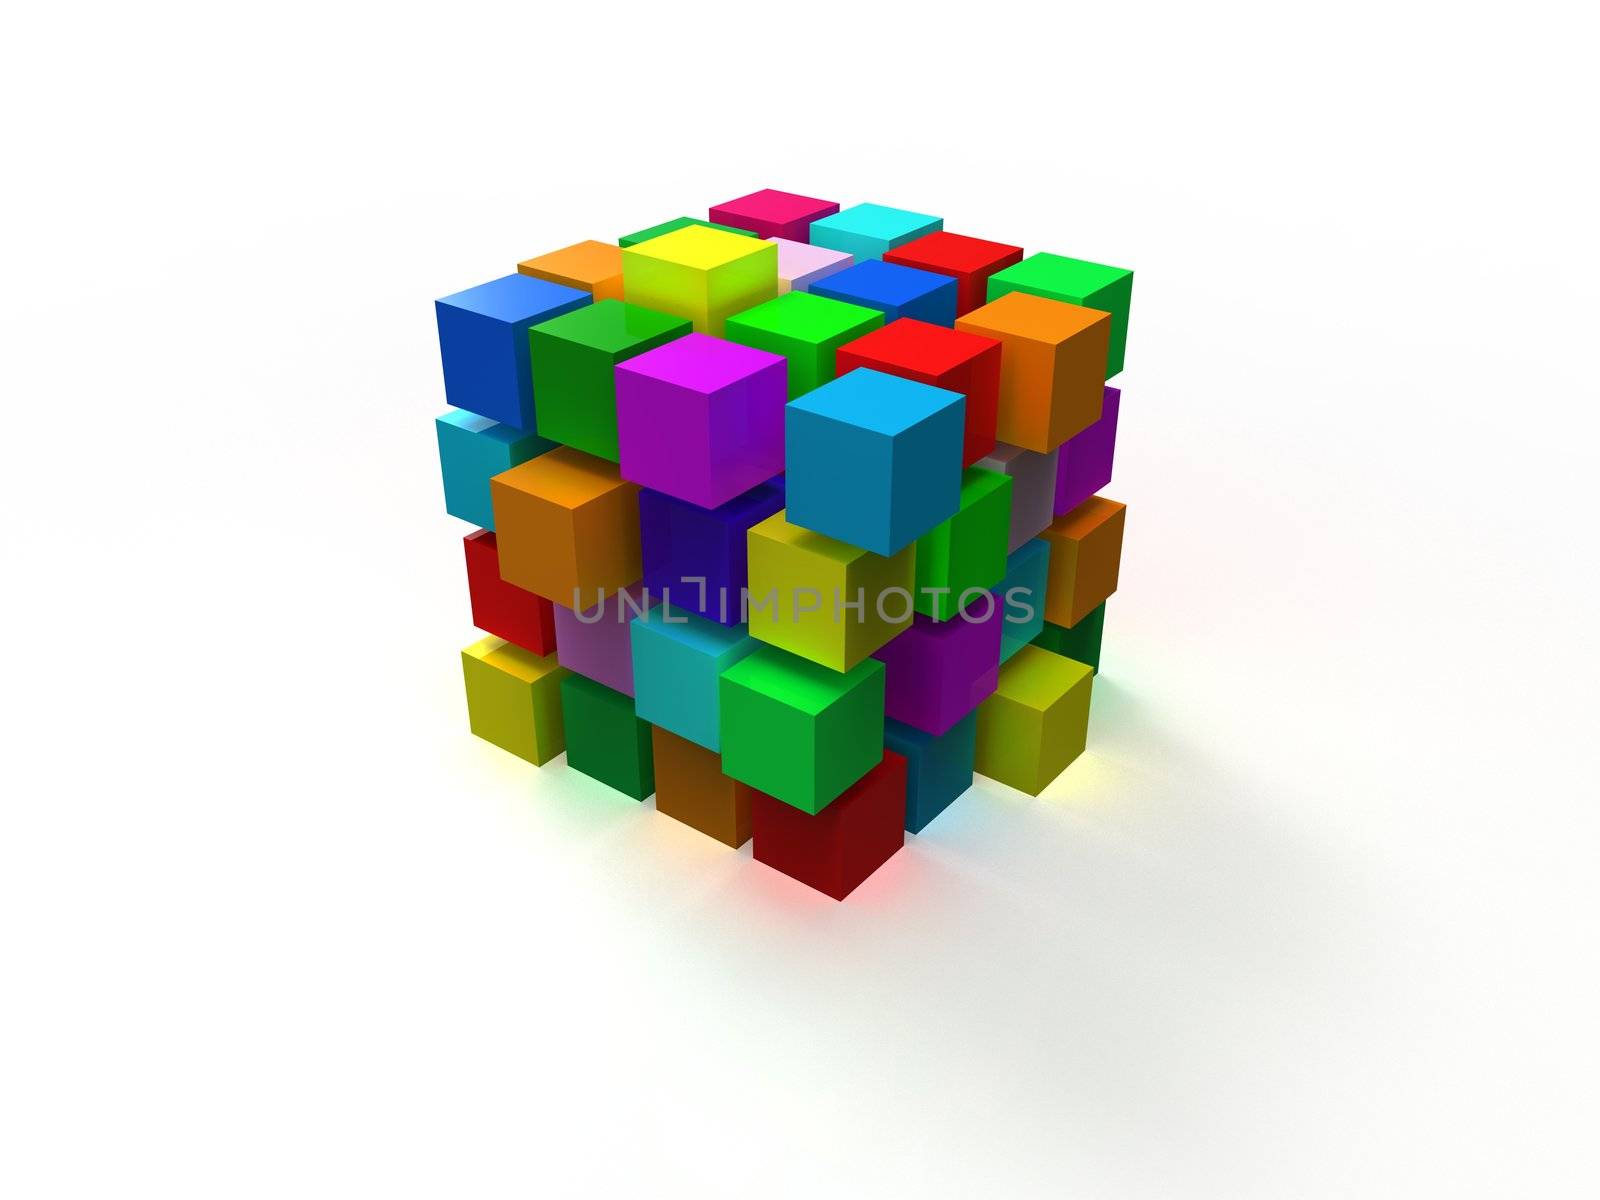 4x4 colorful disordered cube assembling from blocks isolated on white background by vermicule